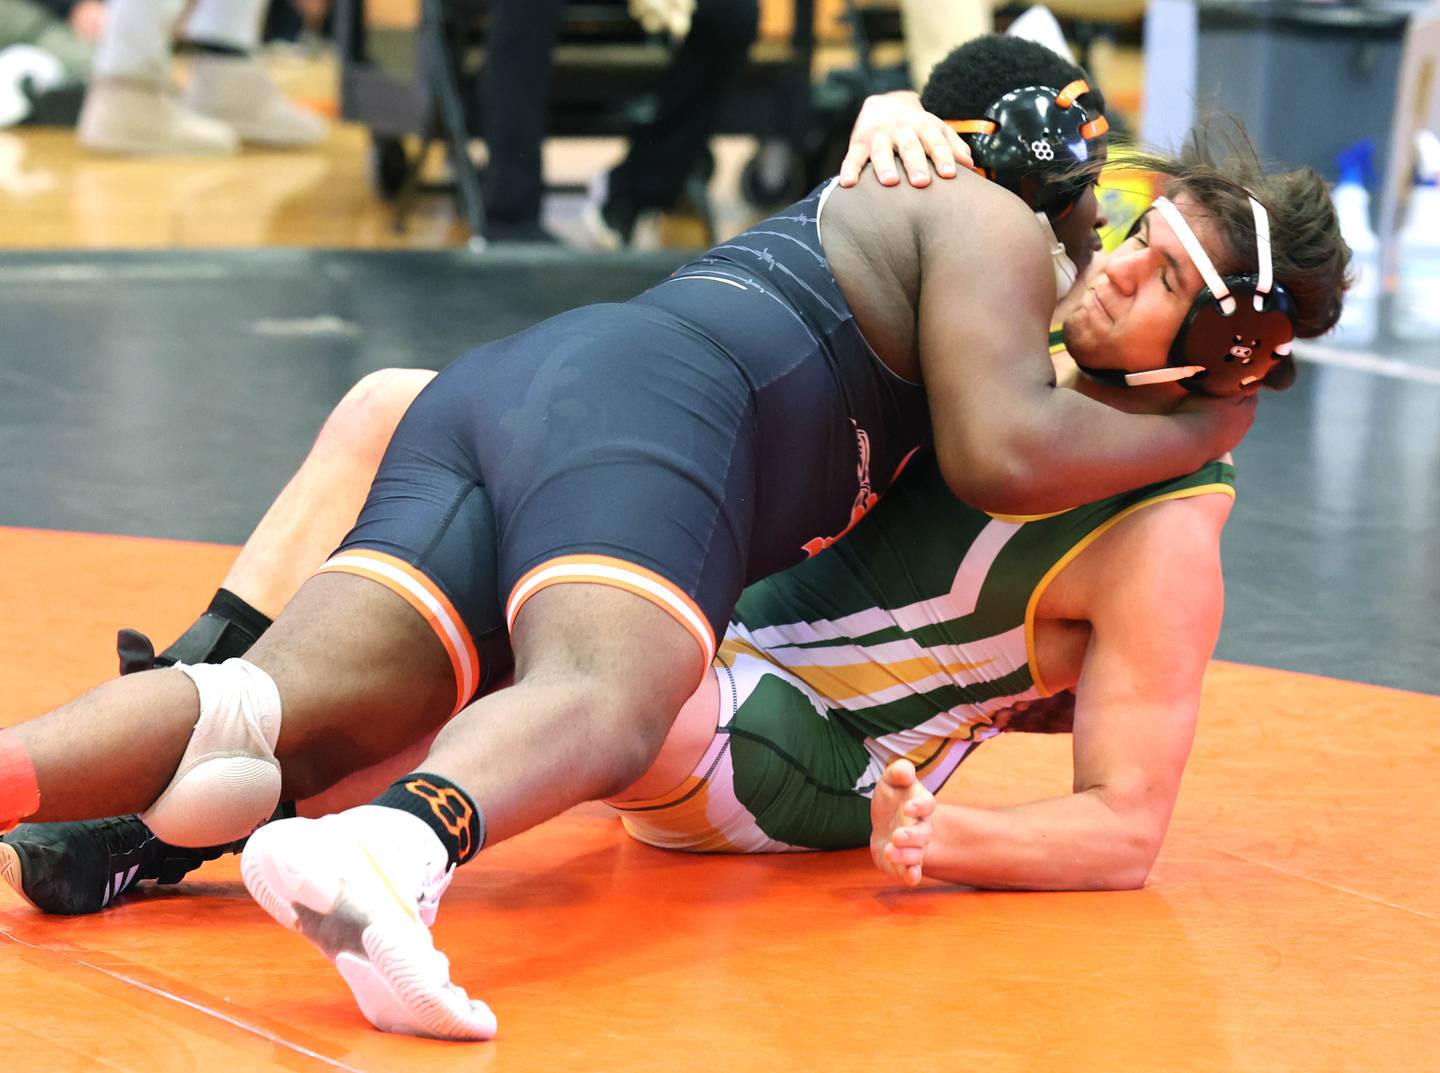 DeKalb’s Lamar Bradley gets Waubonsie Valley’s Jacob Walker to his back in their 220 pound semifinal match Friday, Jan. 20, 2023, during the DuPage Valley Conference wrestling tournament at DeKalb High School.